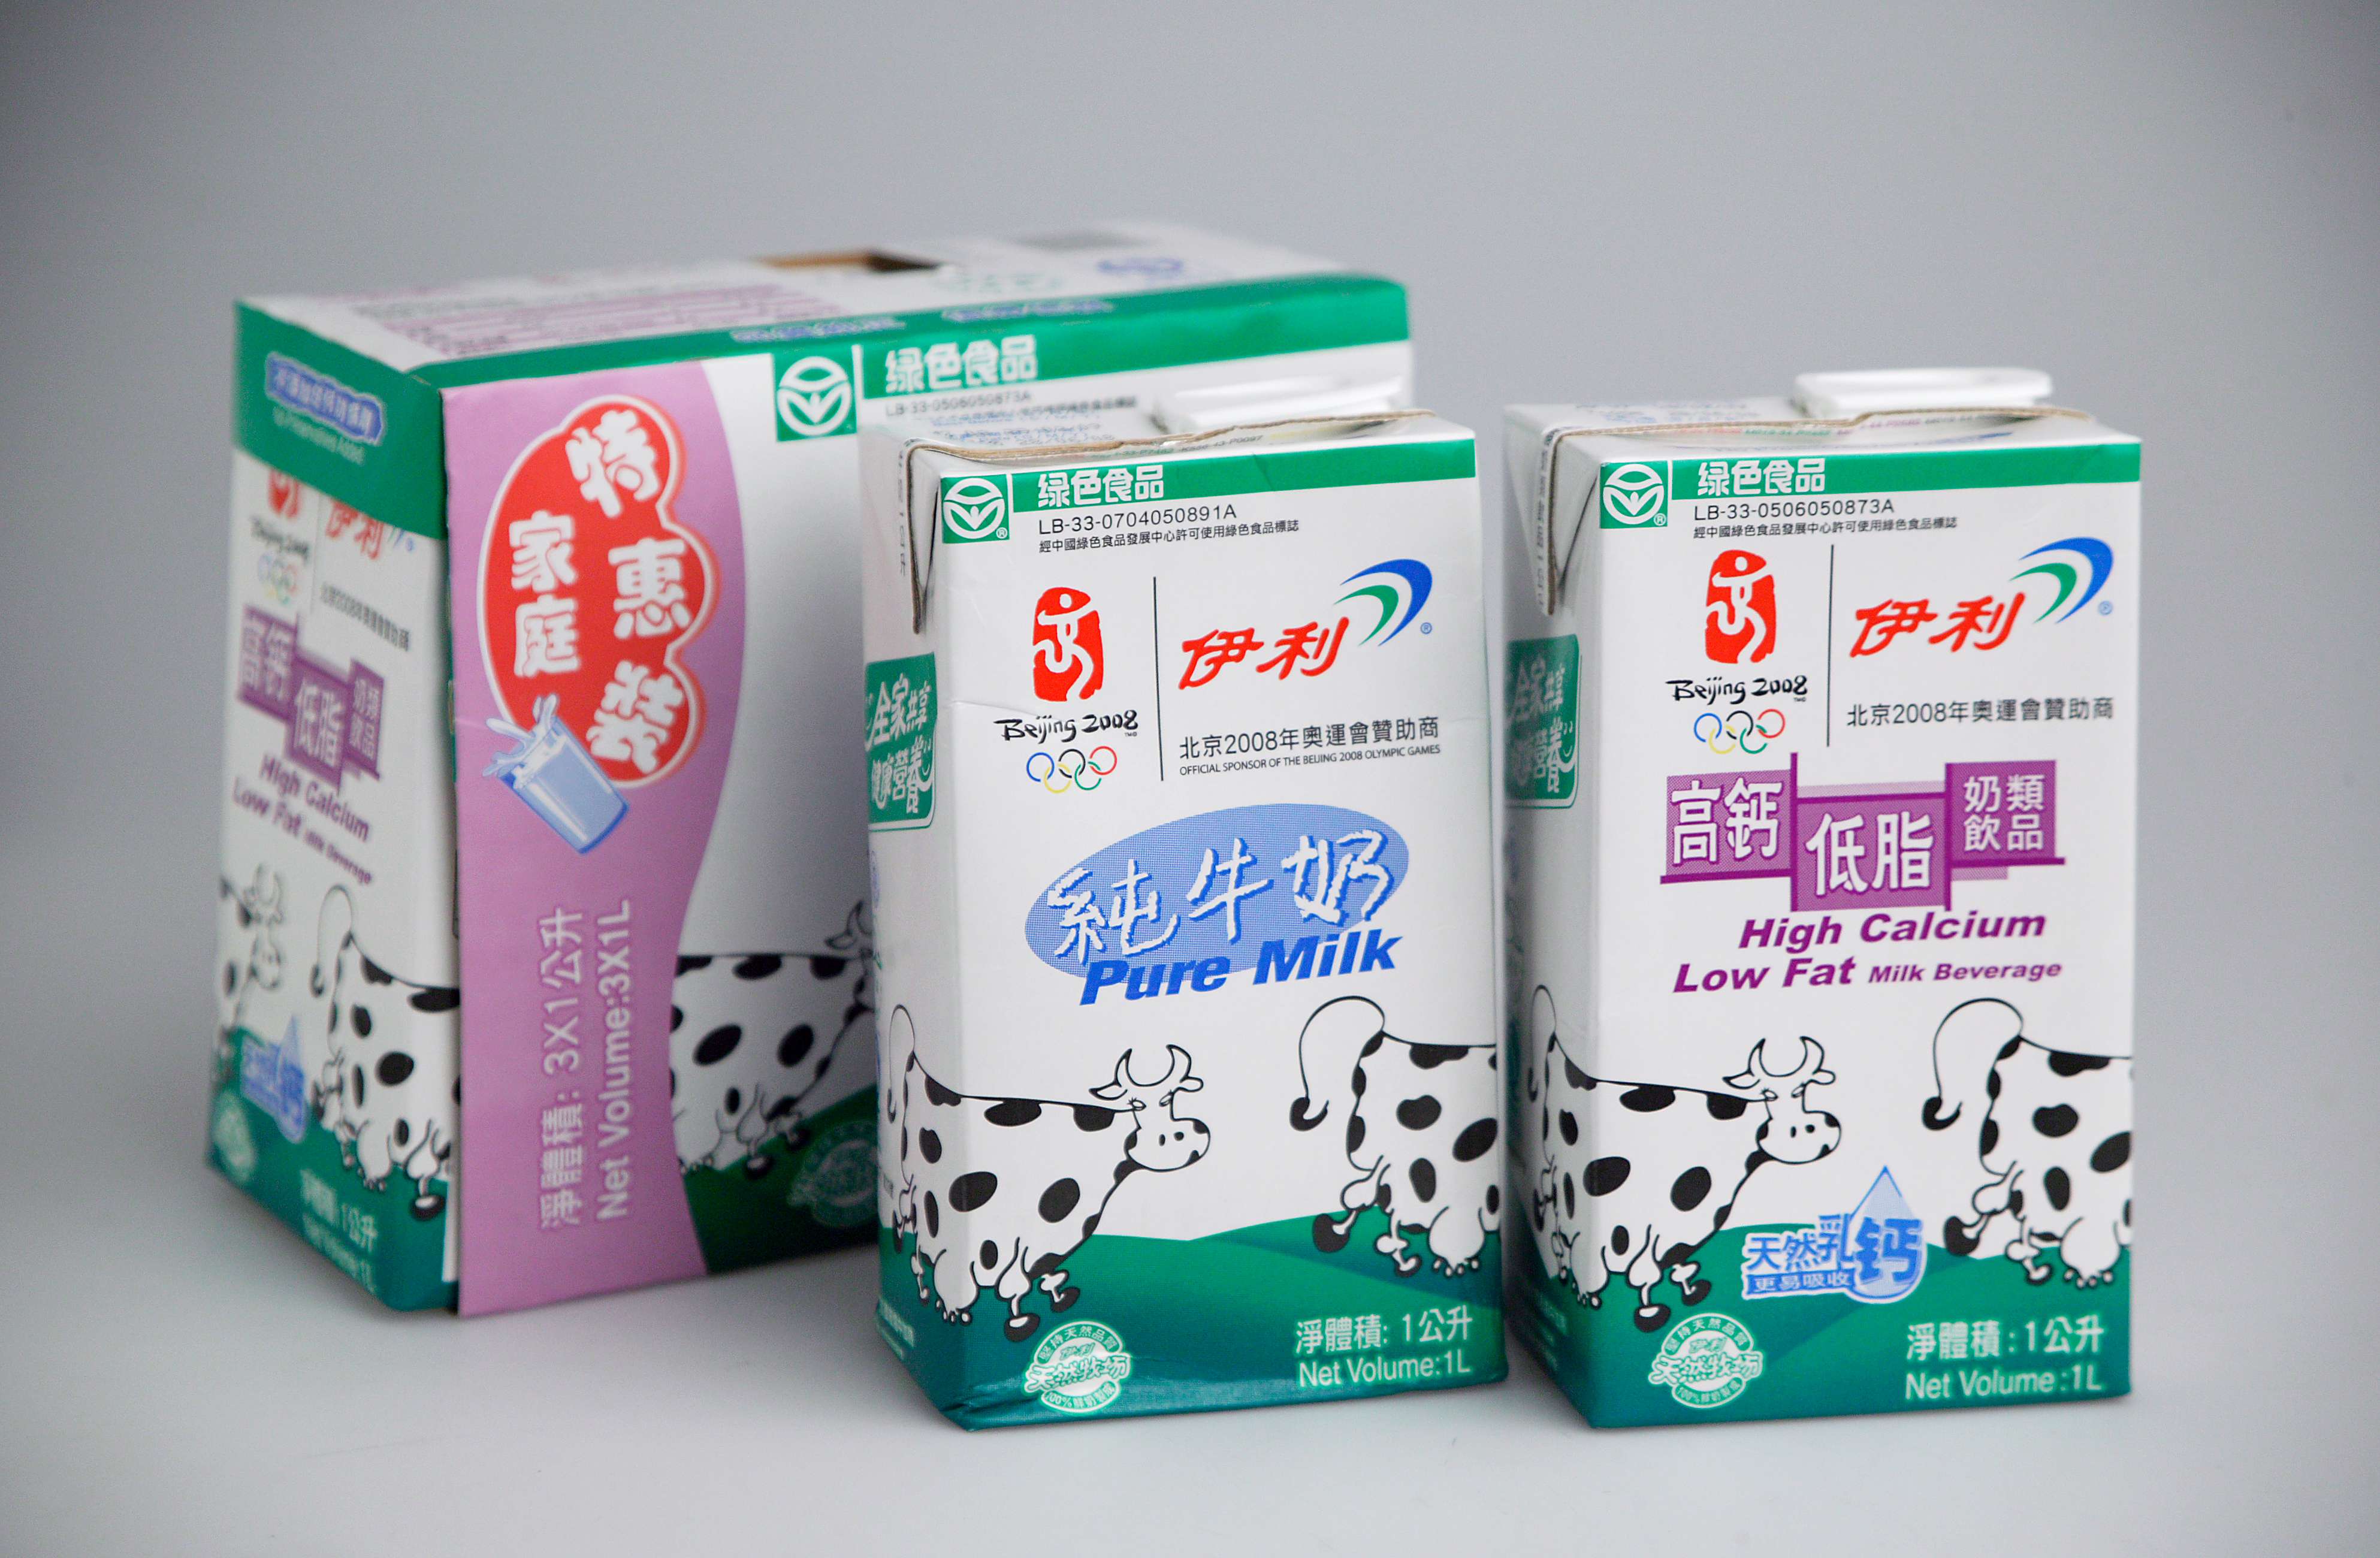 Yili will issue 9 billion yuan of shares to buy control of Hong Kong-traded China Shengmu Organic Milk, as well as dilute Sunshine Insurance’s stake